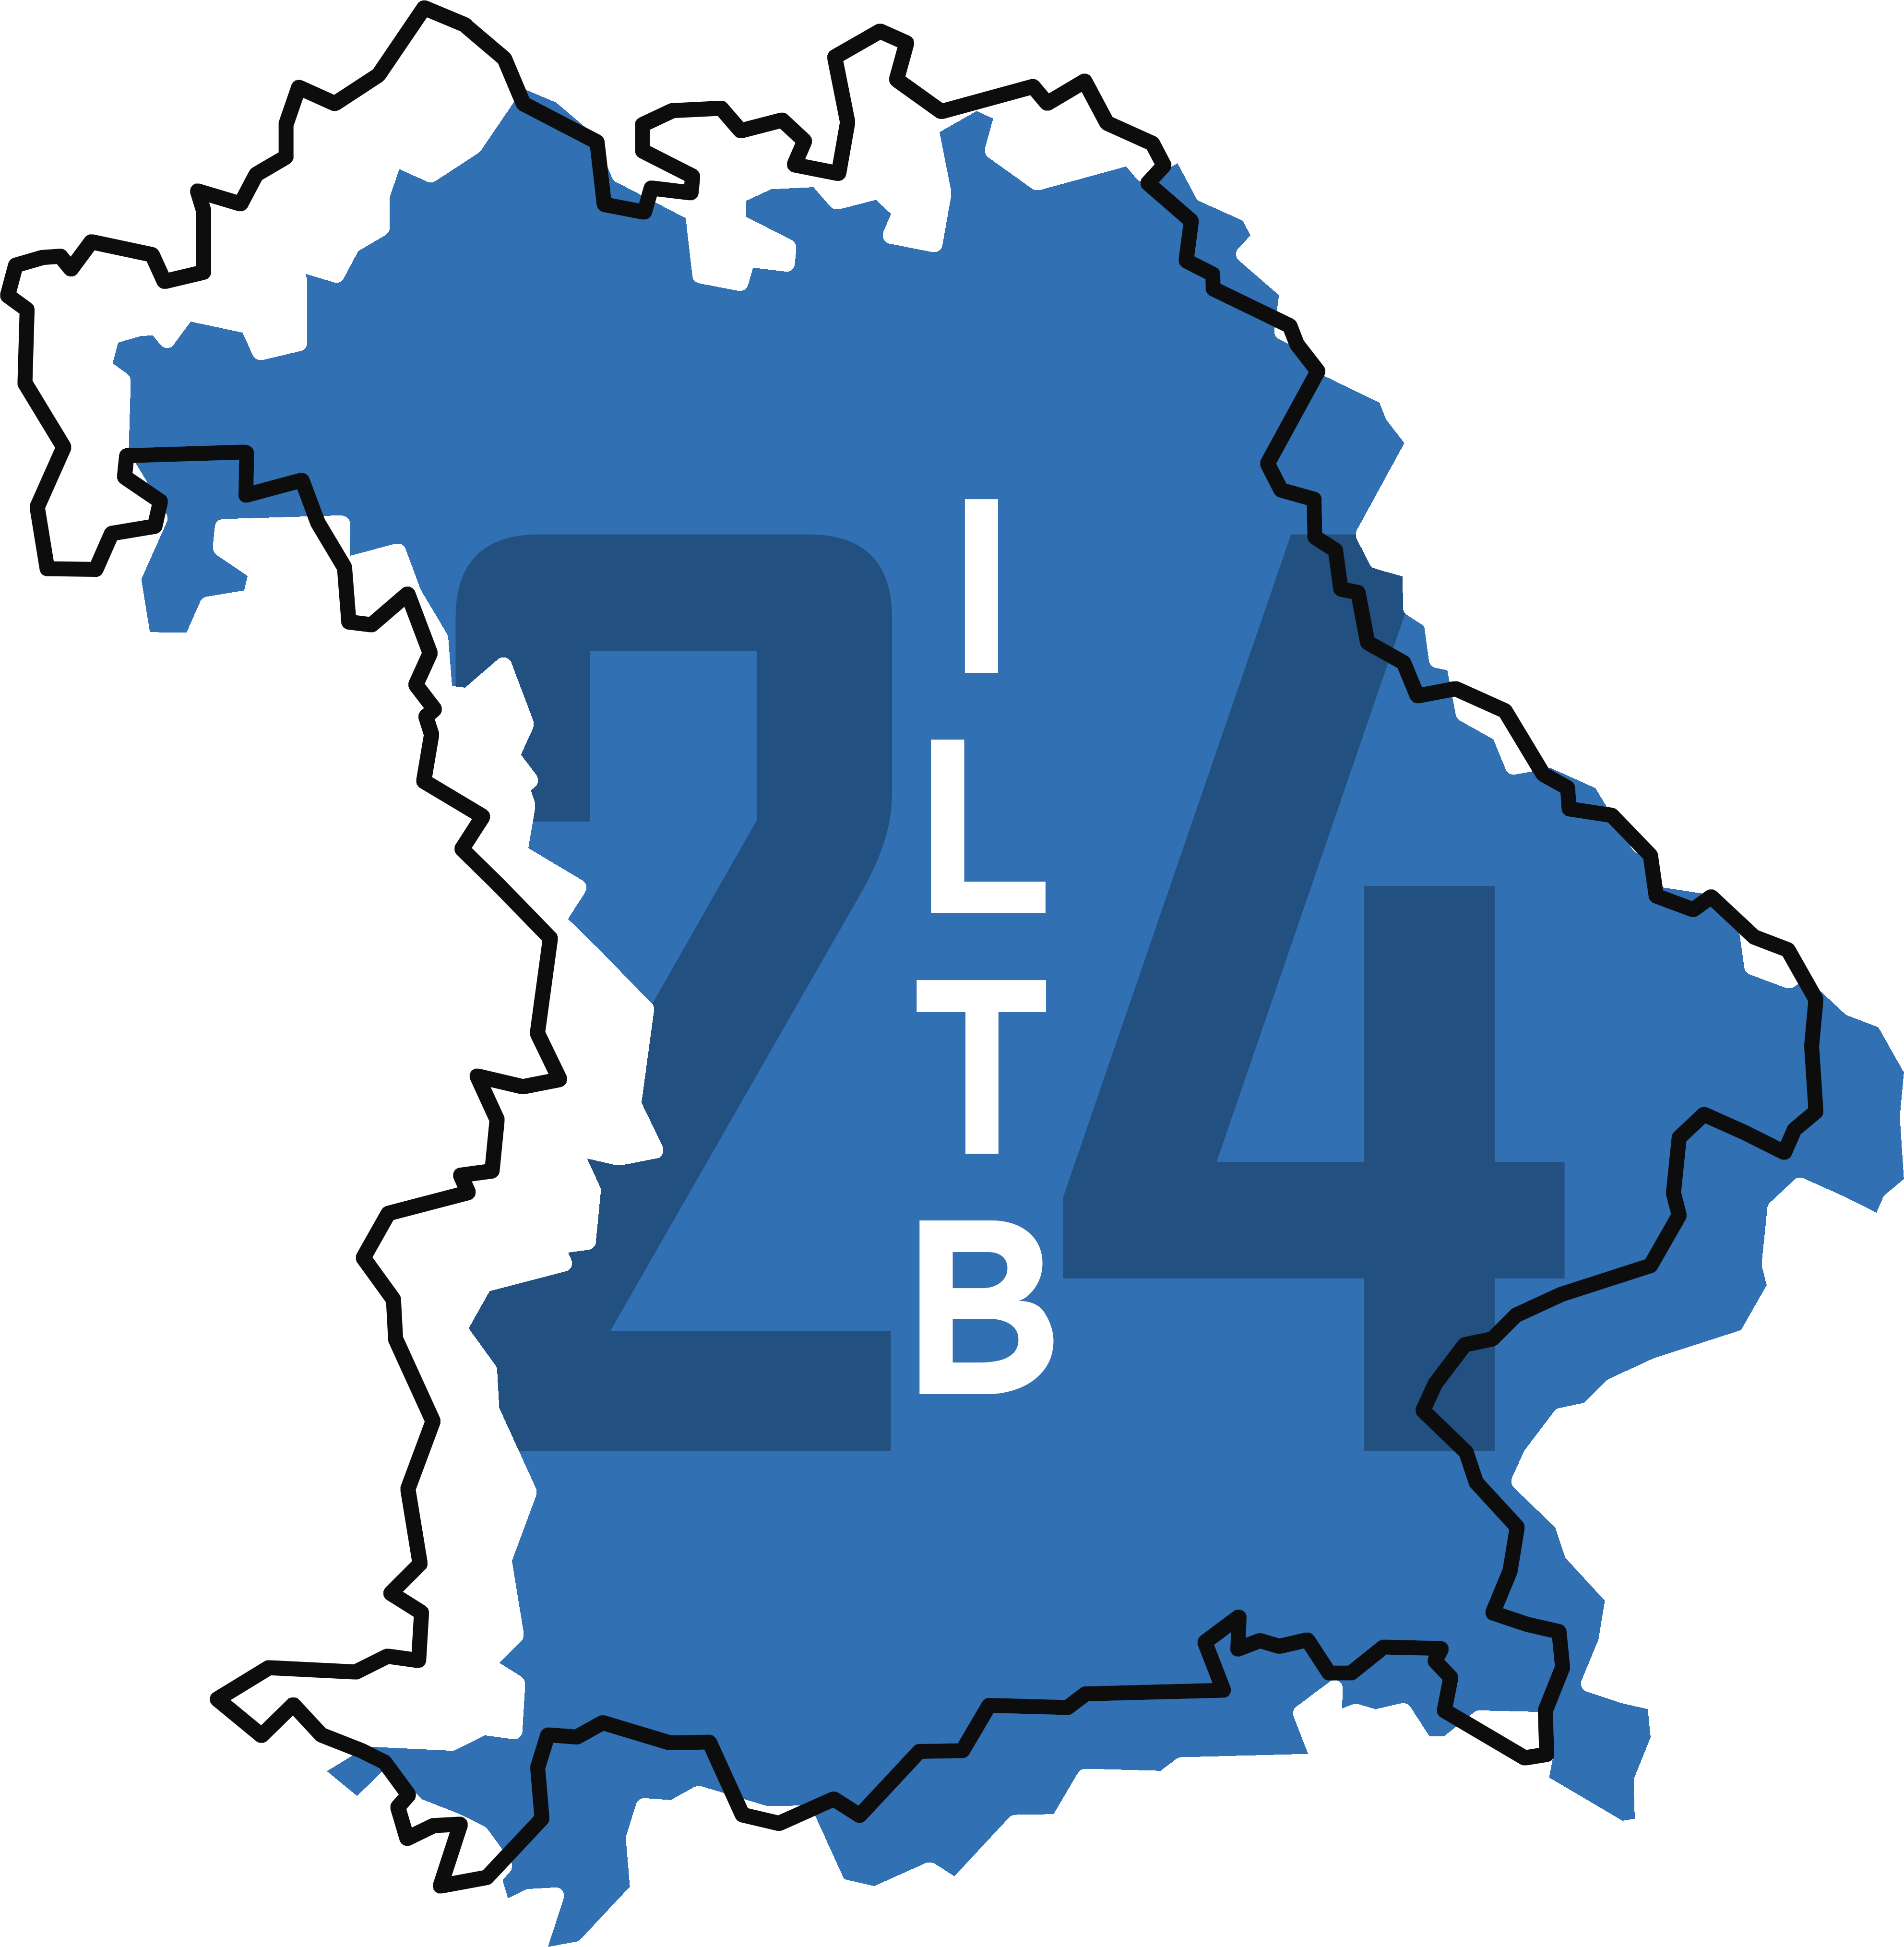 logo of PD Event for Teachers, depicting the German state of Bavaria, the number 24 in its outlines and the events acronym: ILTB